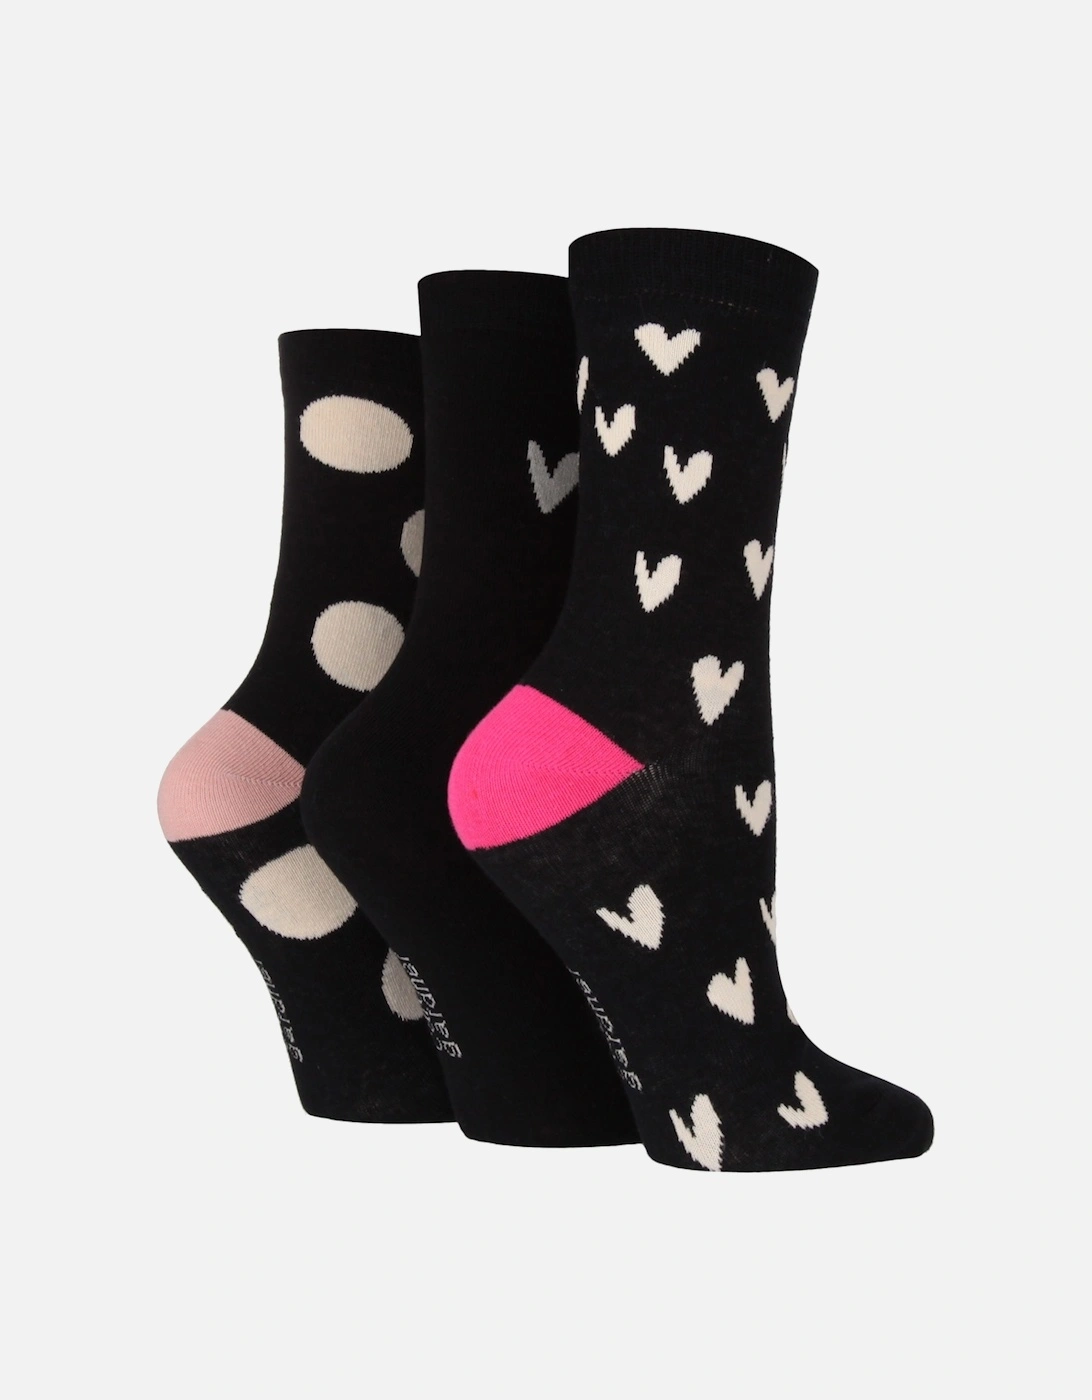 3 PAIR LADIES SOCKS WITH MINI HEARTS AND BIG SPOTS, 2 of 1